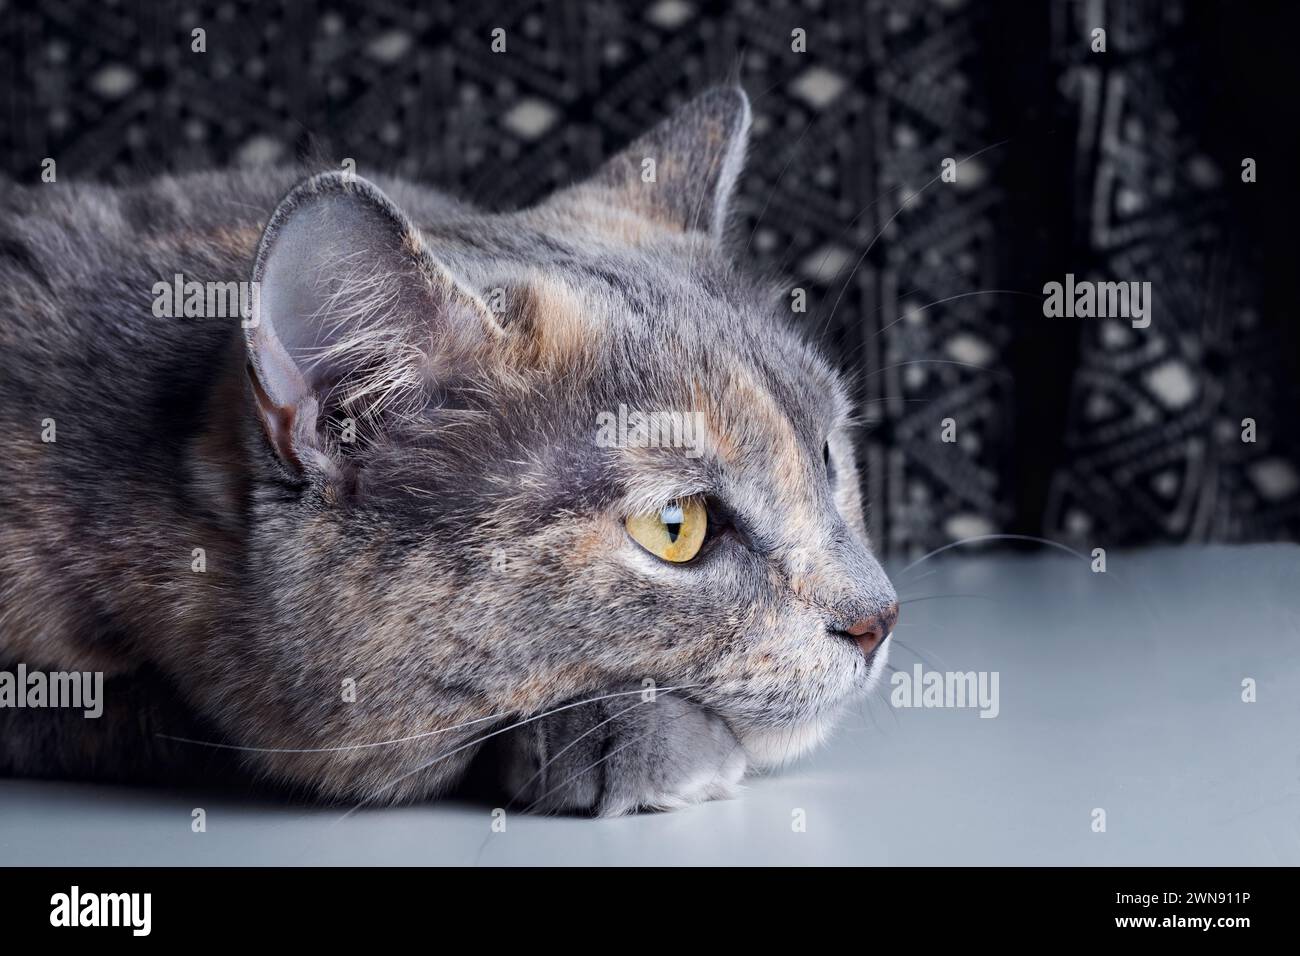 Portrait of a cat with yellow eyes on a black background. Stock Photo